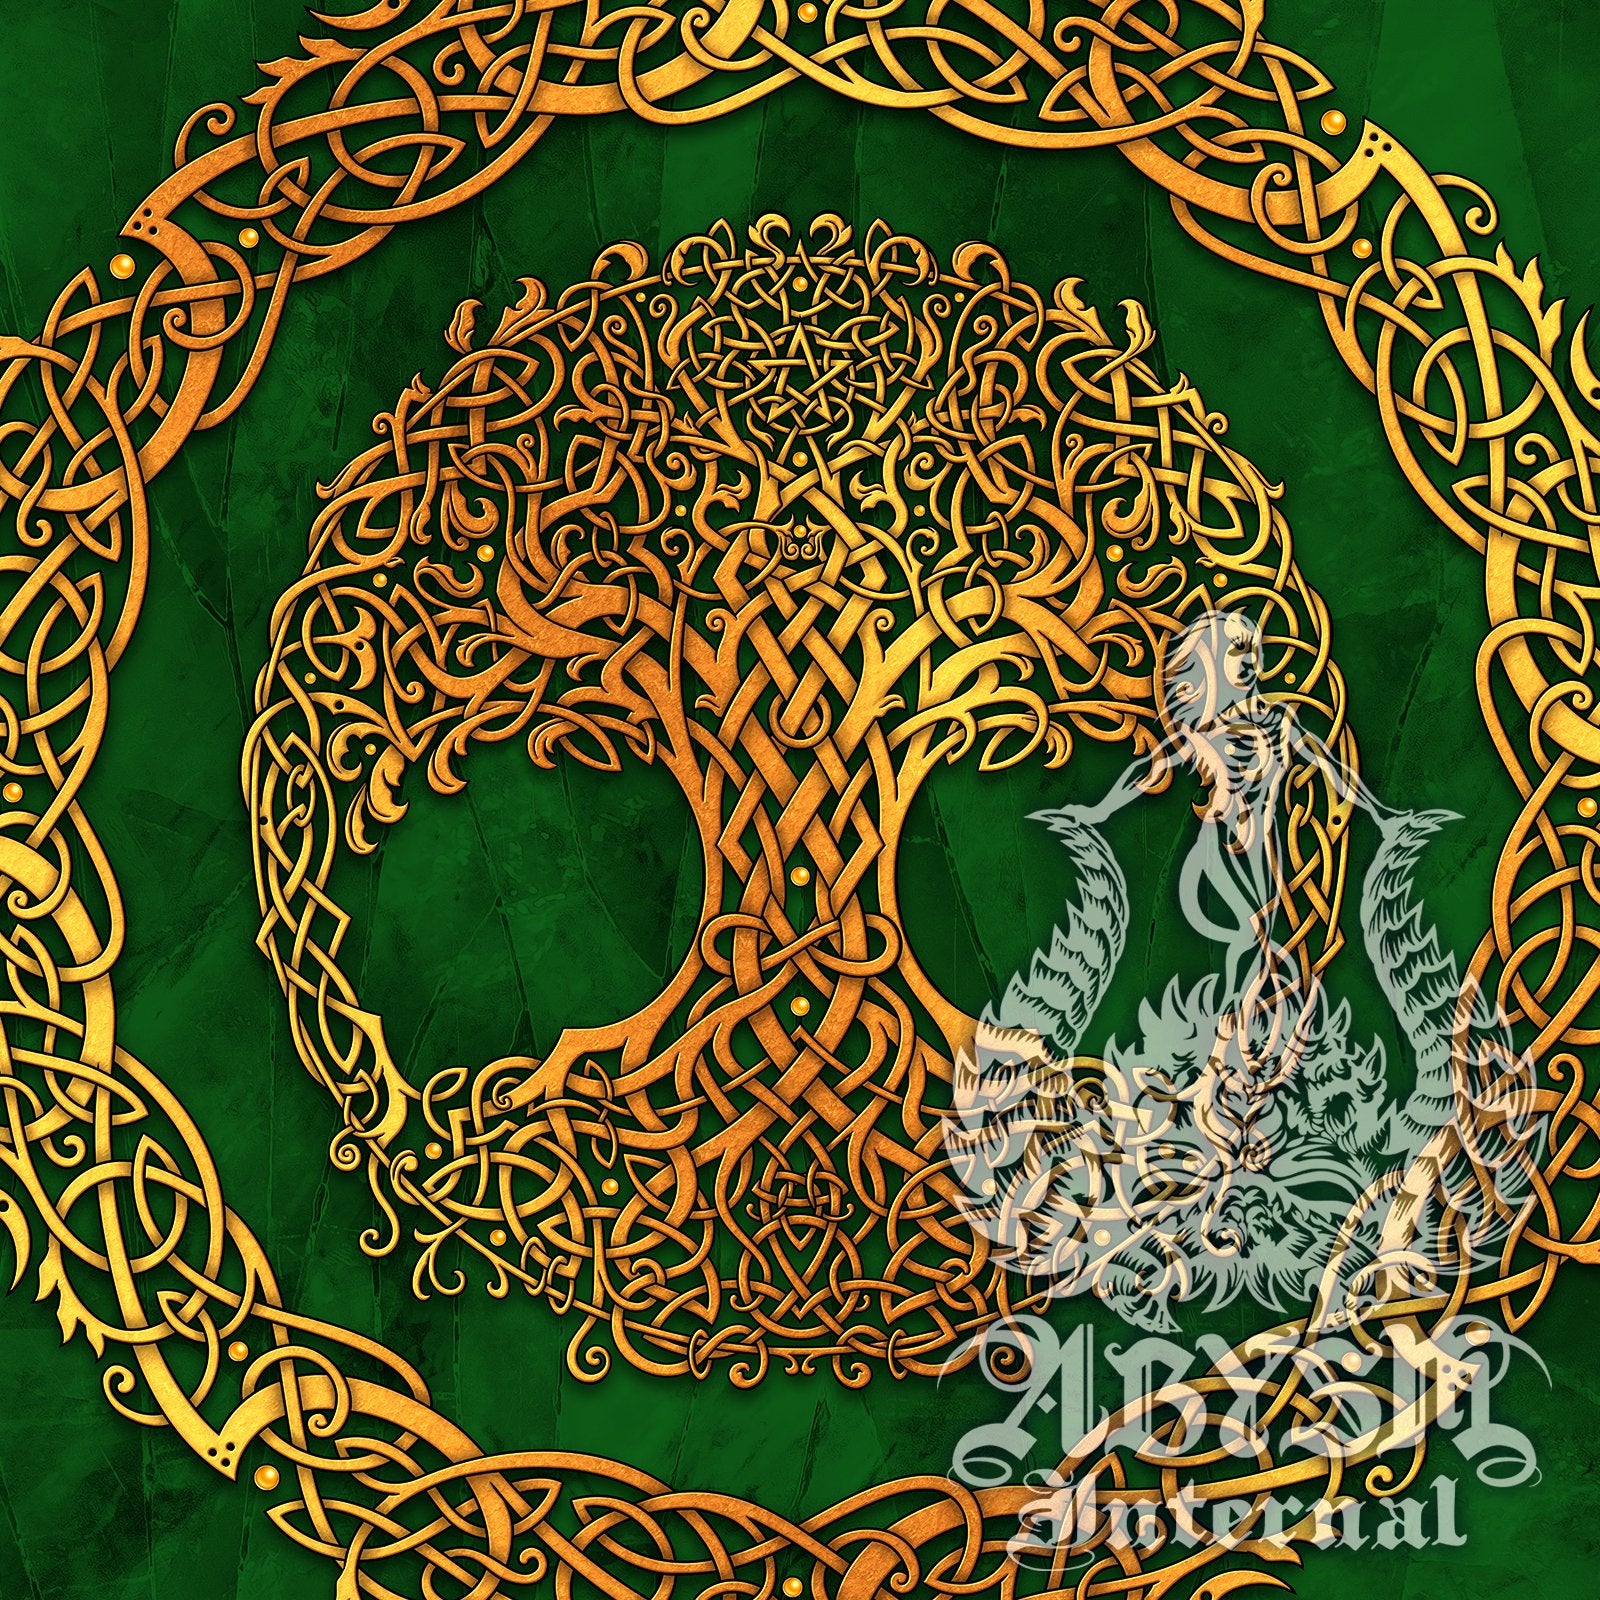 Custom intricate Knotwork art, Viking or Celtic personalized designs for merch, fabrics and banners - Abysm Internal